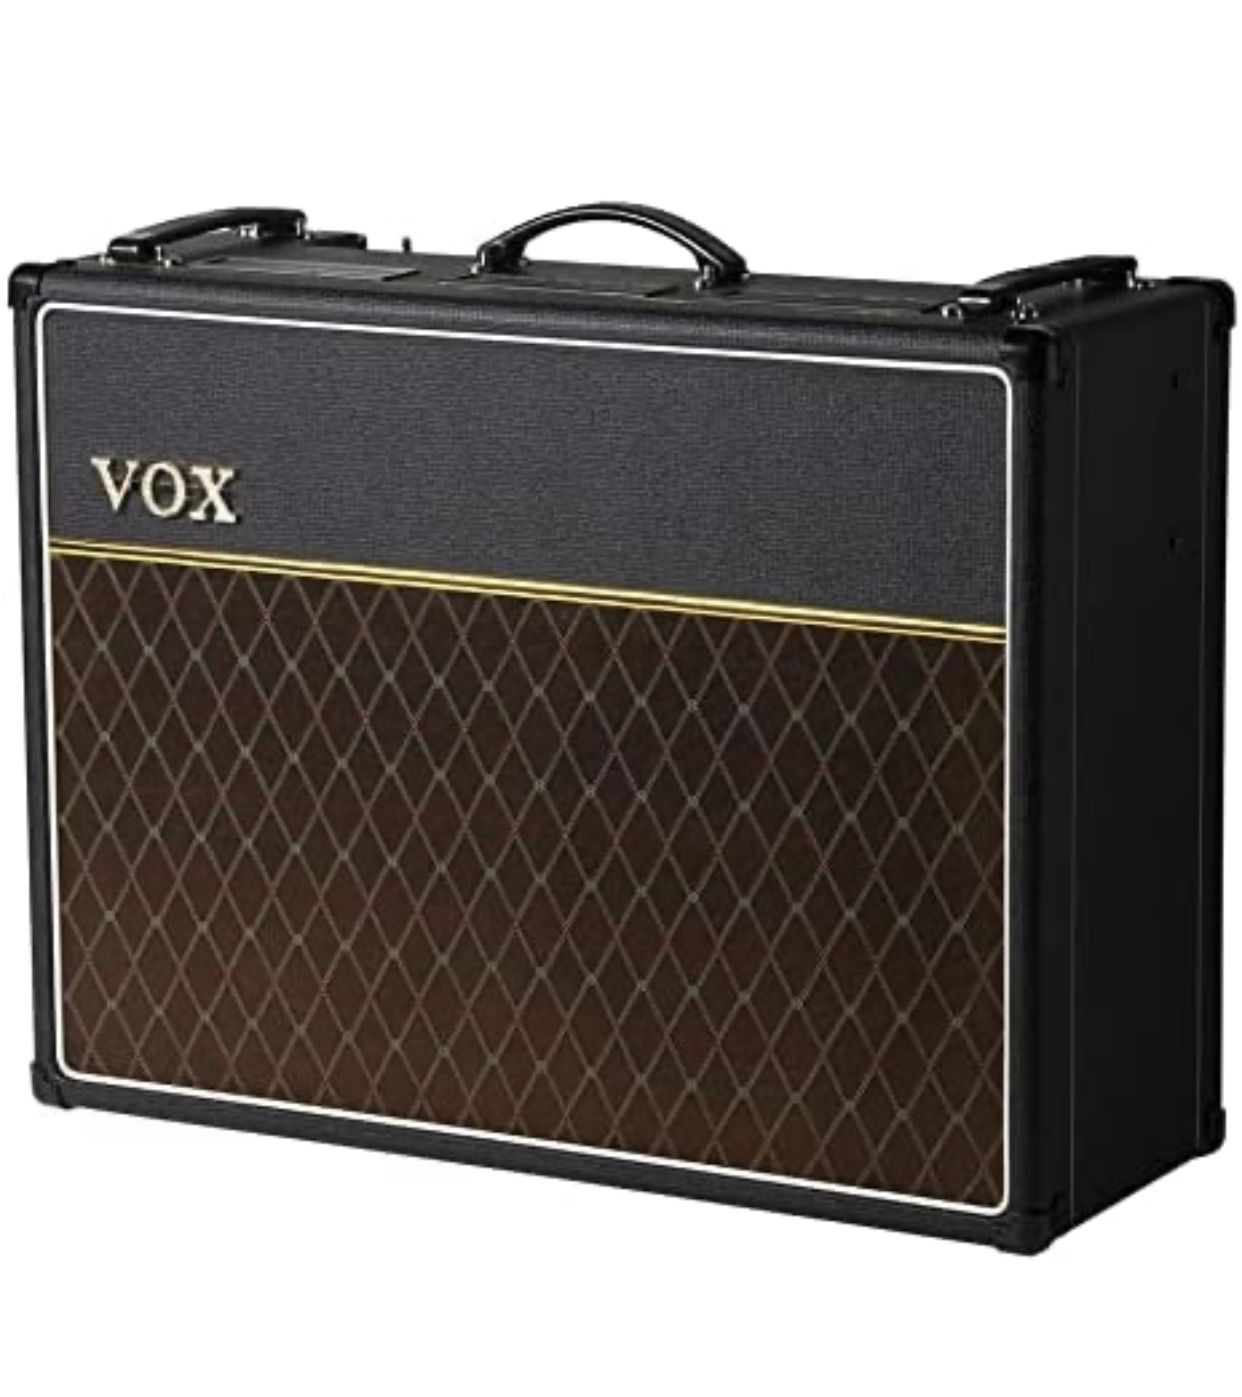 (NEW) VOX, 2 Electric Guitar Amplifier Footswitch, Black (AC30C2)